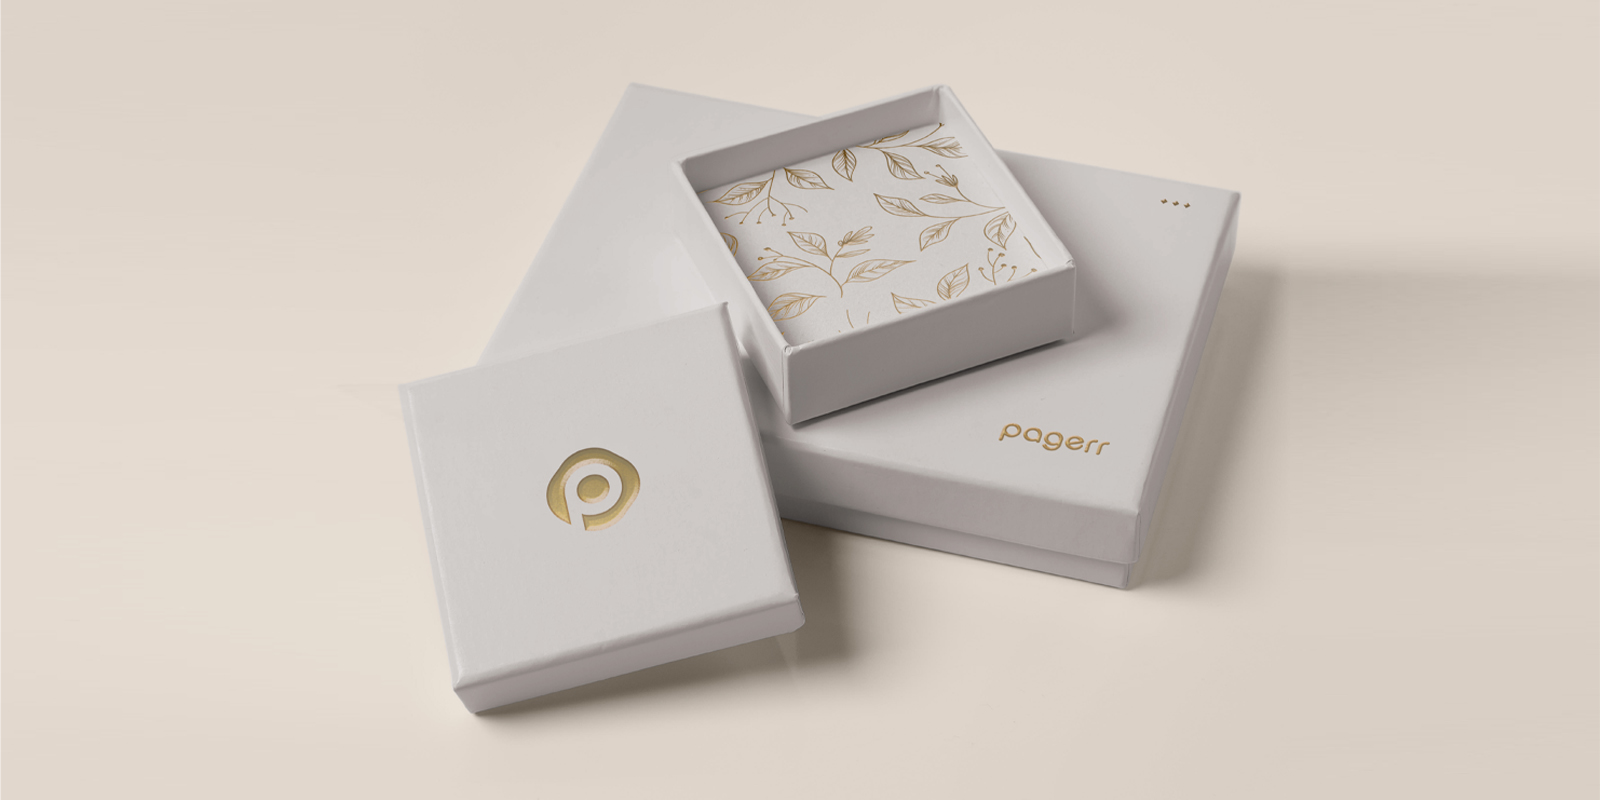 Product boxes in Ballarat - Print with Pagerr